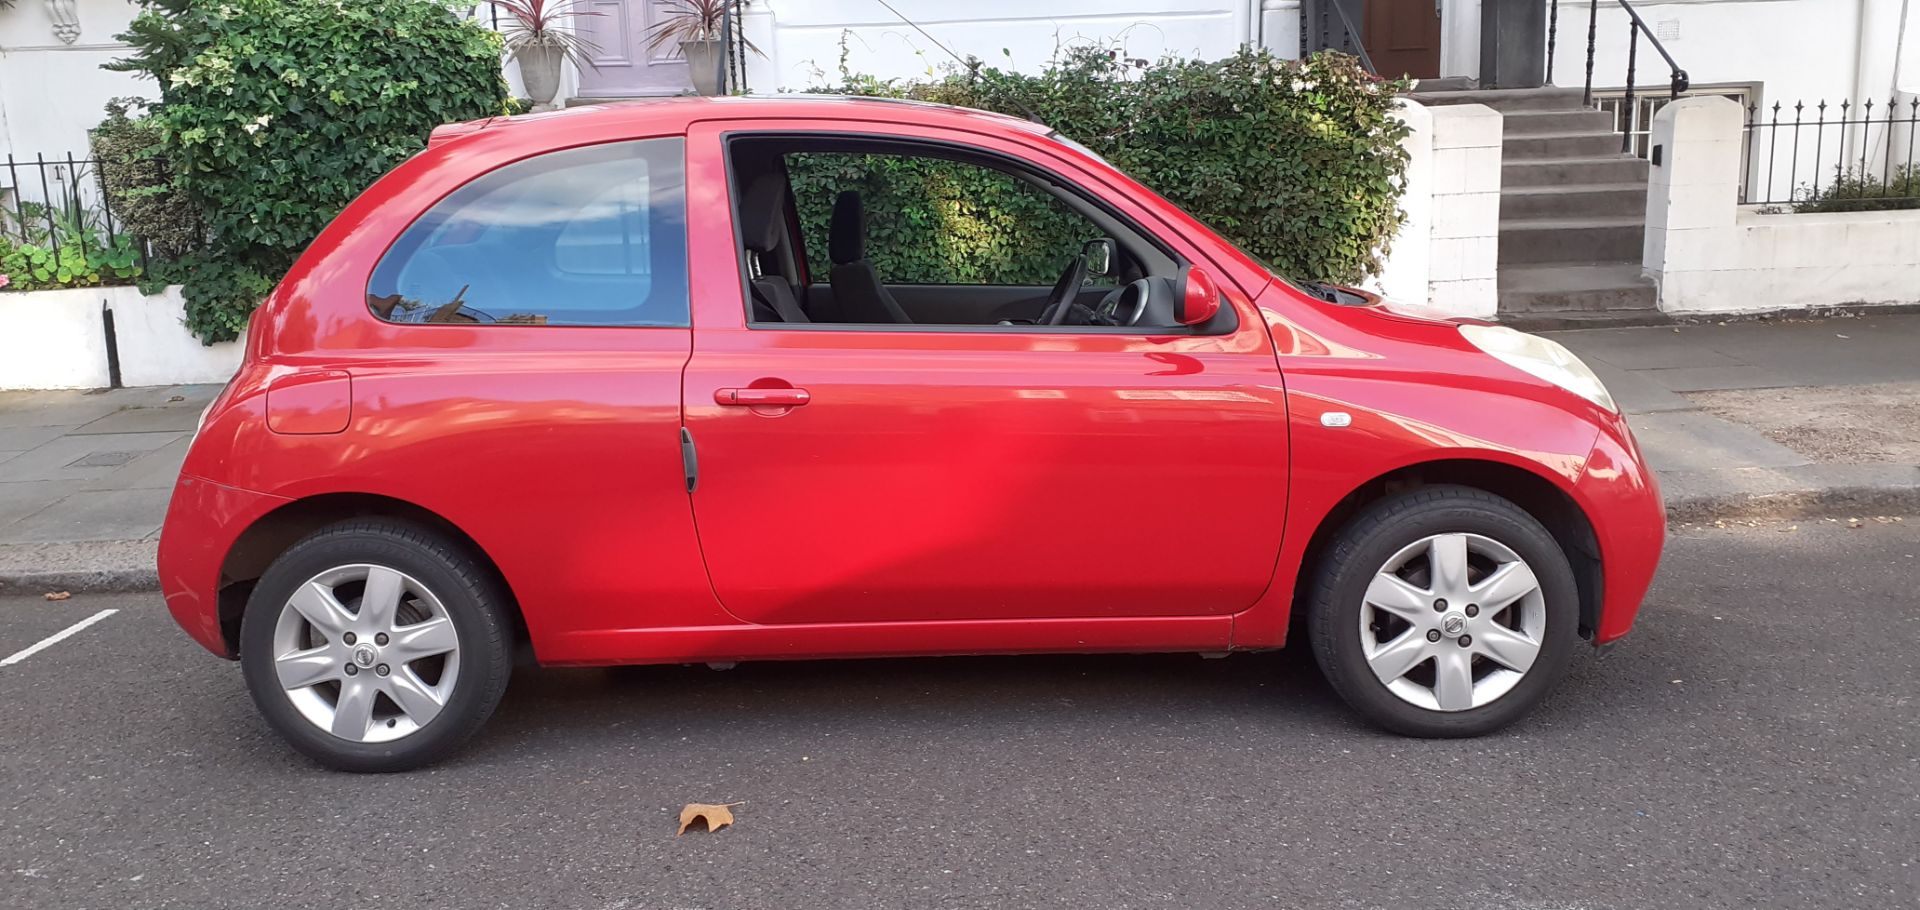 NISSAN MICRA 1.2 SE AUTO. ONLY 64K MILES - Image 2 of 6